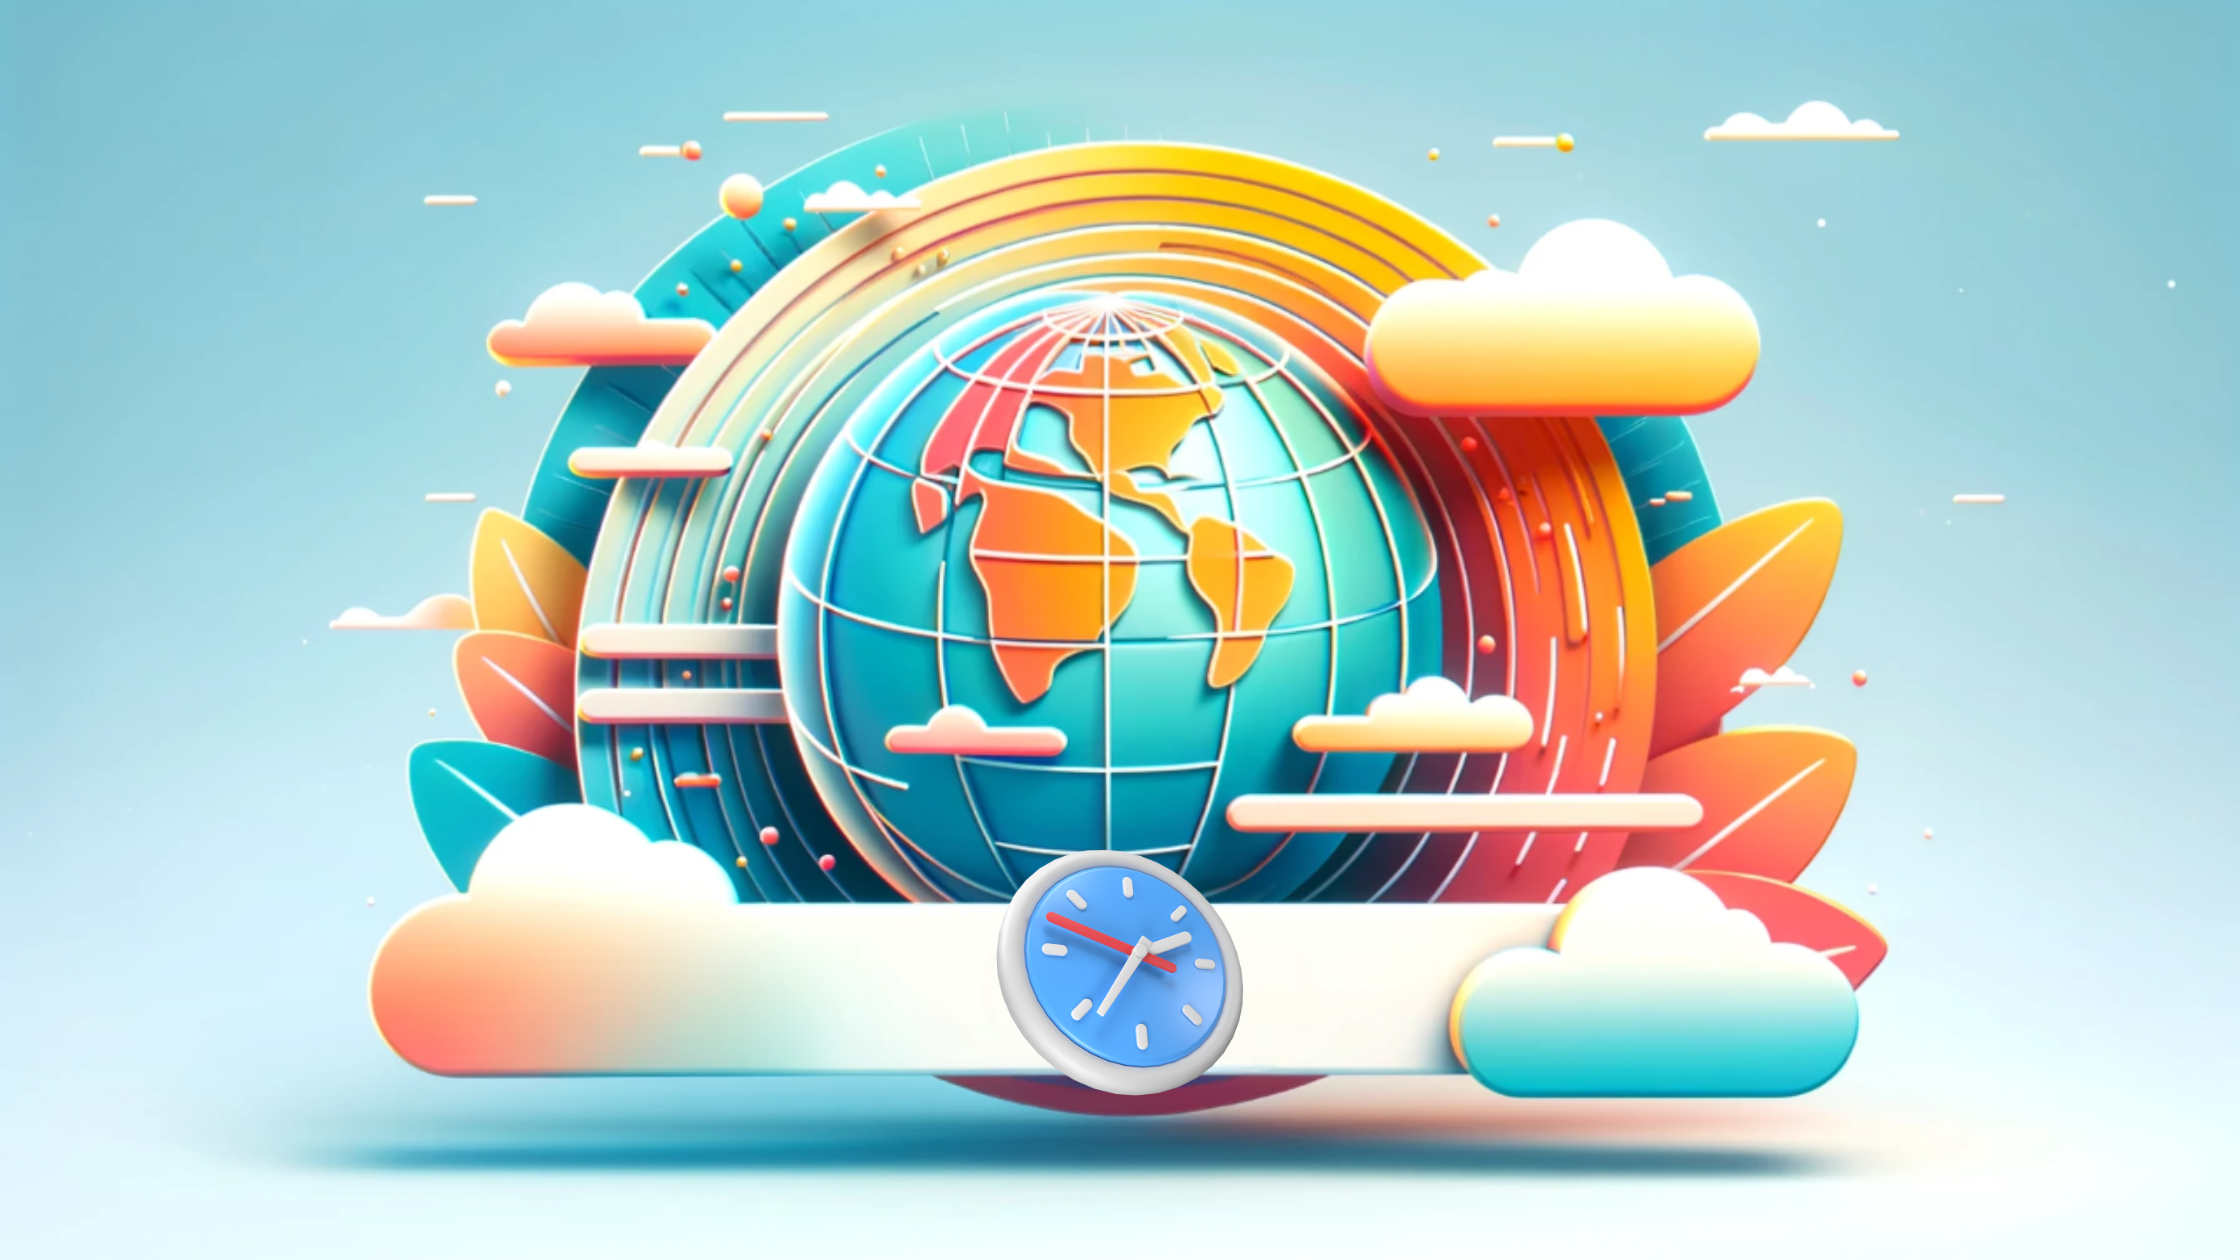 an icon of the globe in 3D style and a clock for world map time zone depiction 